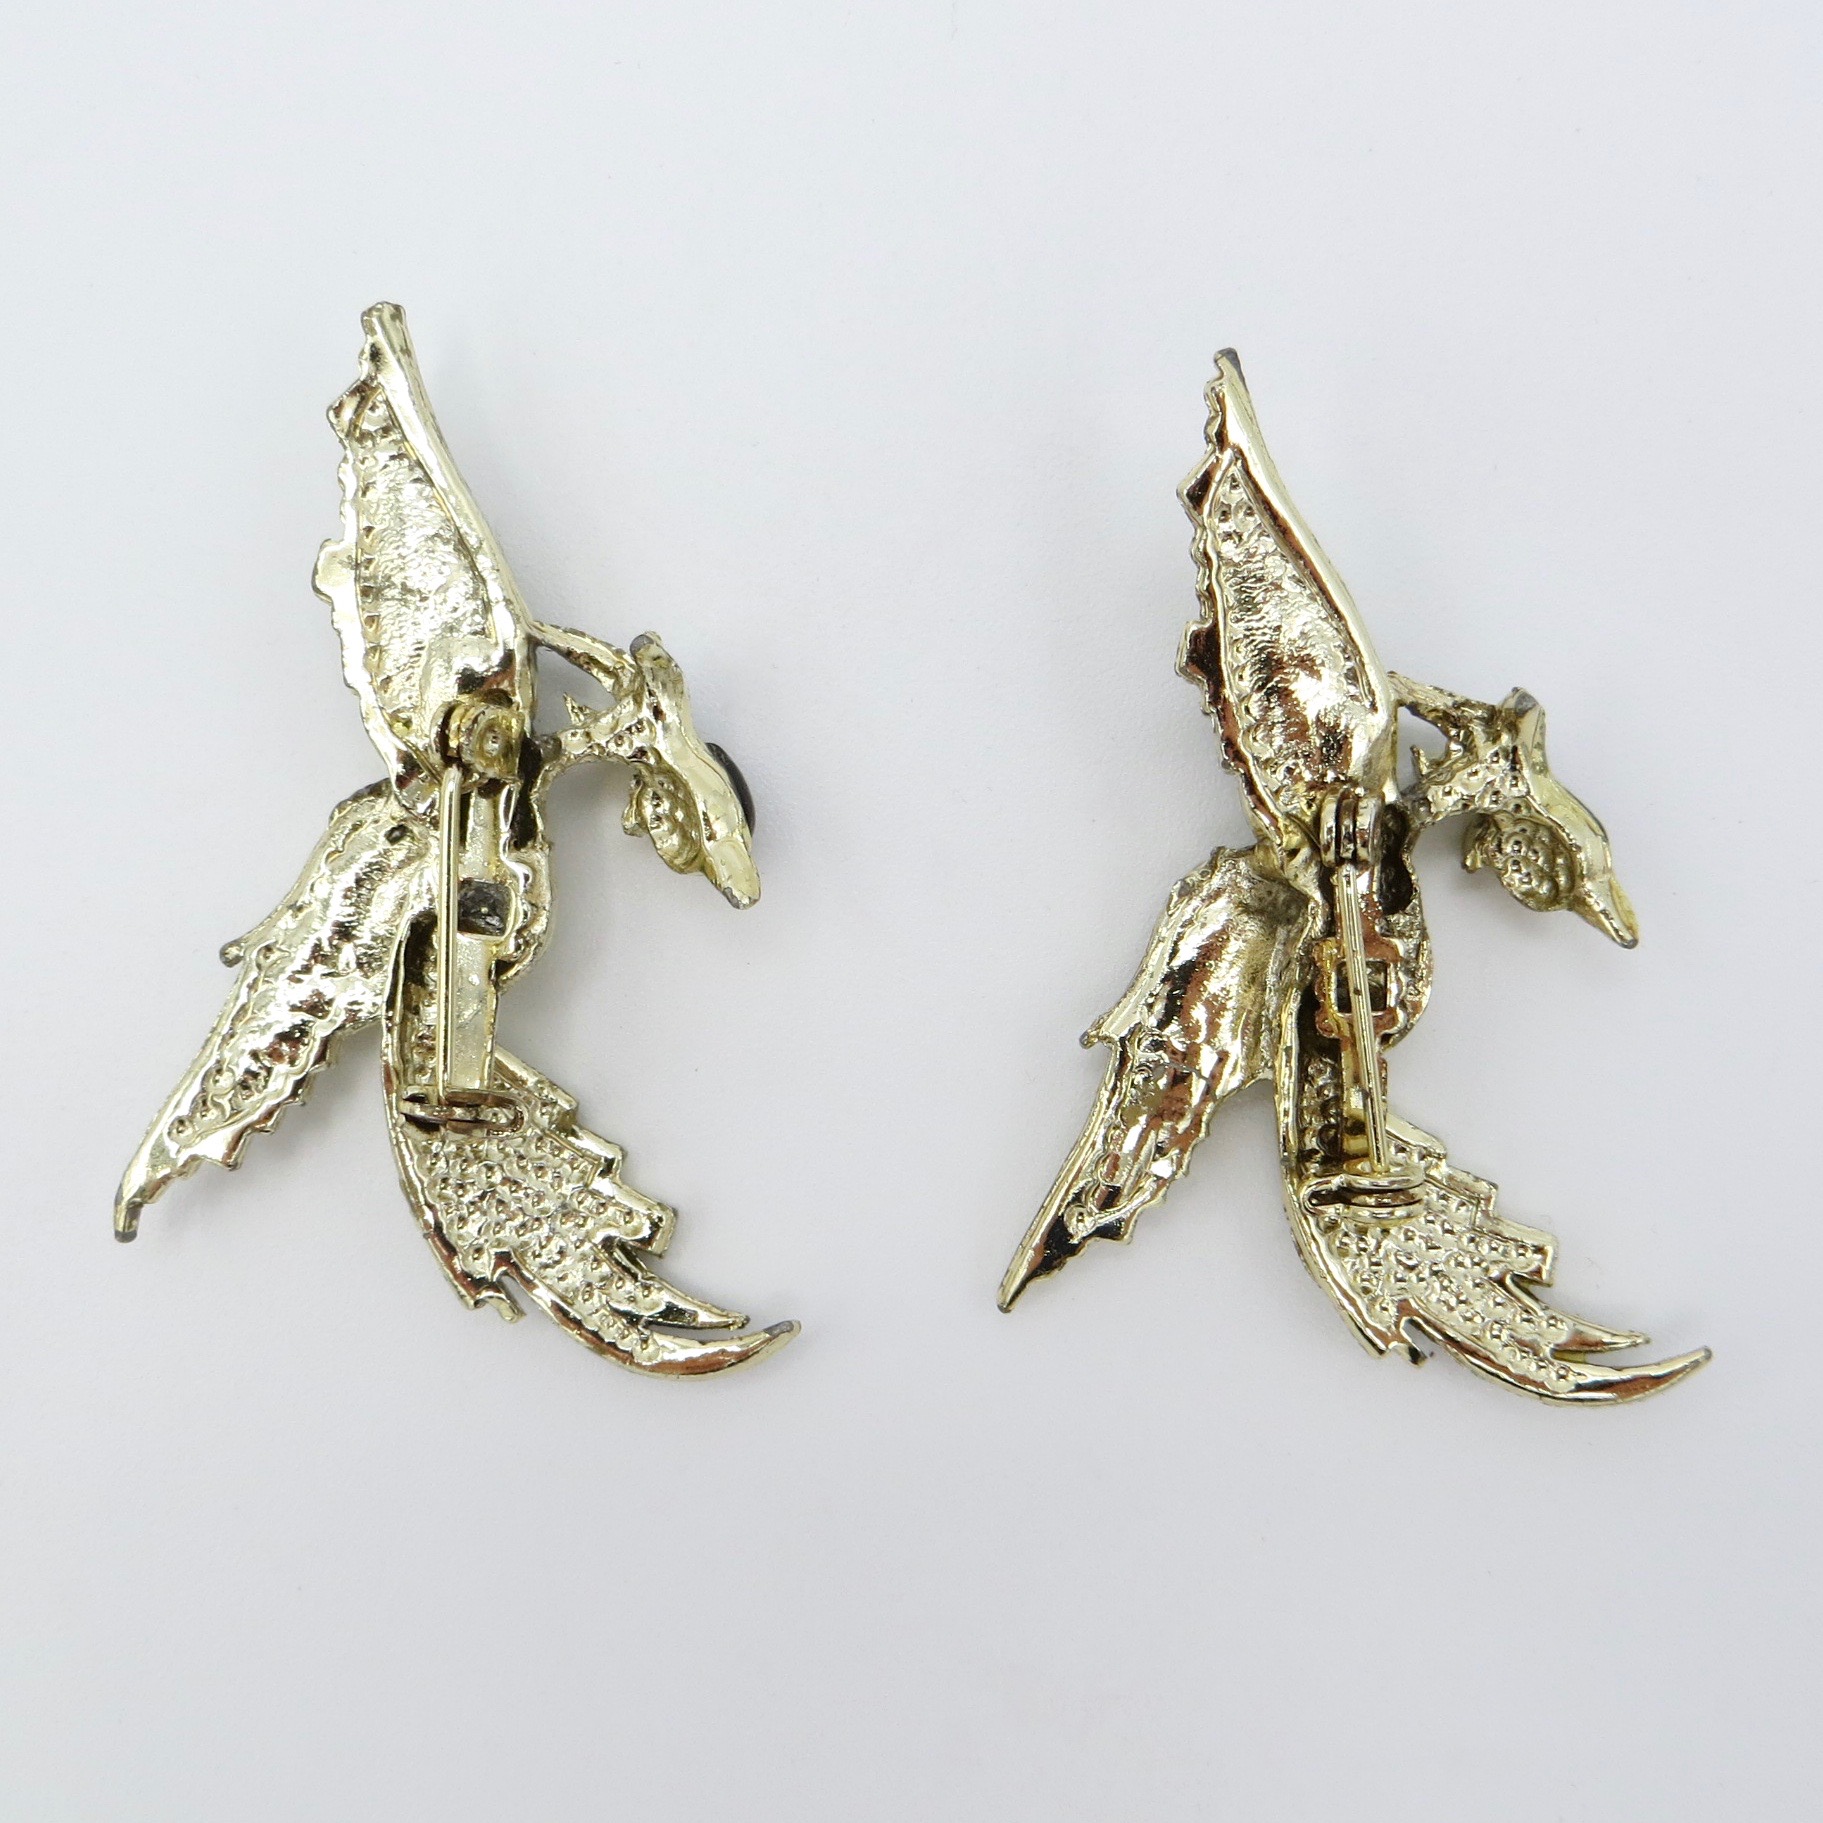 Pair of Bird Brooches